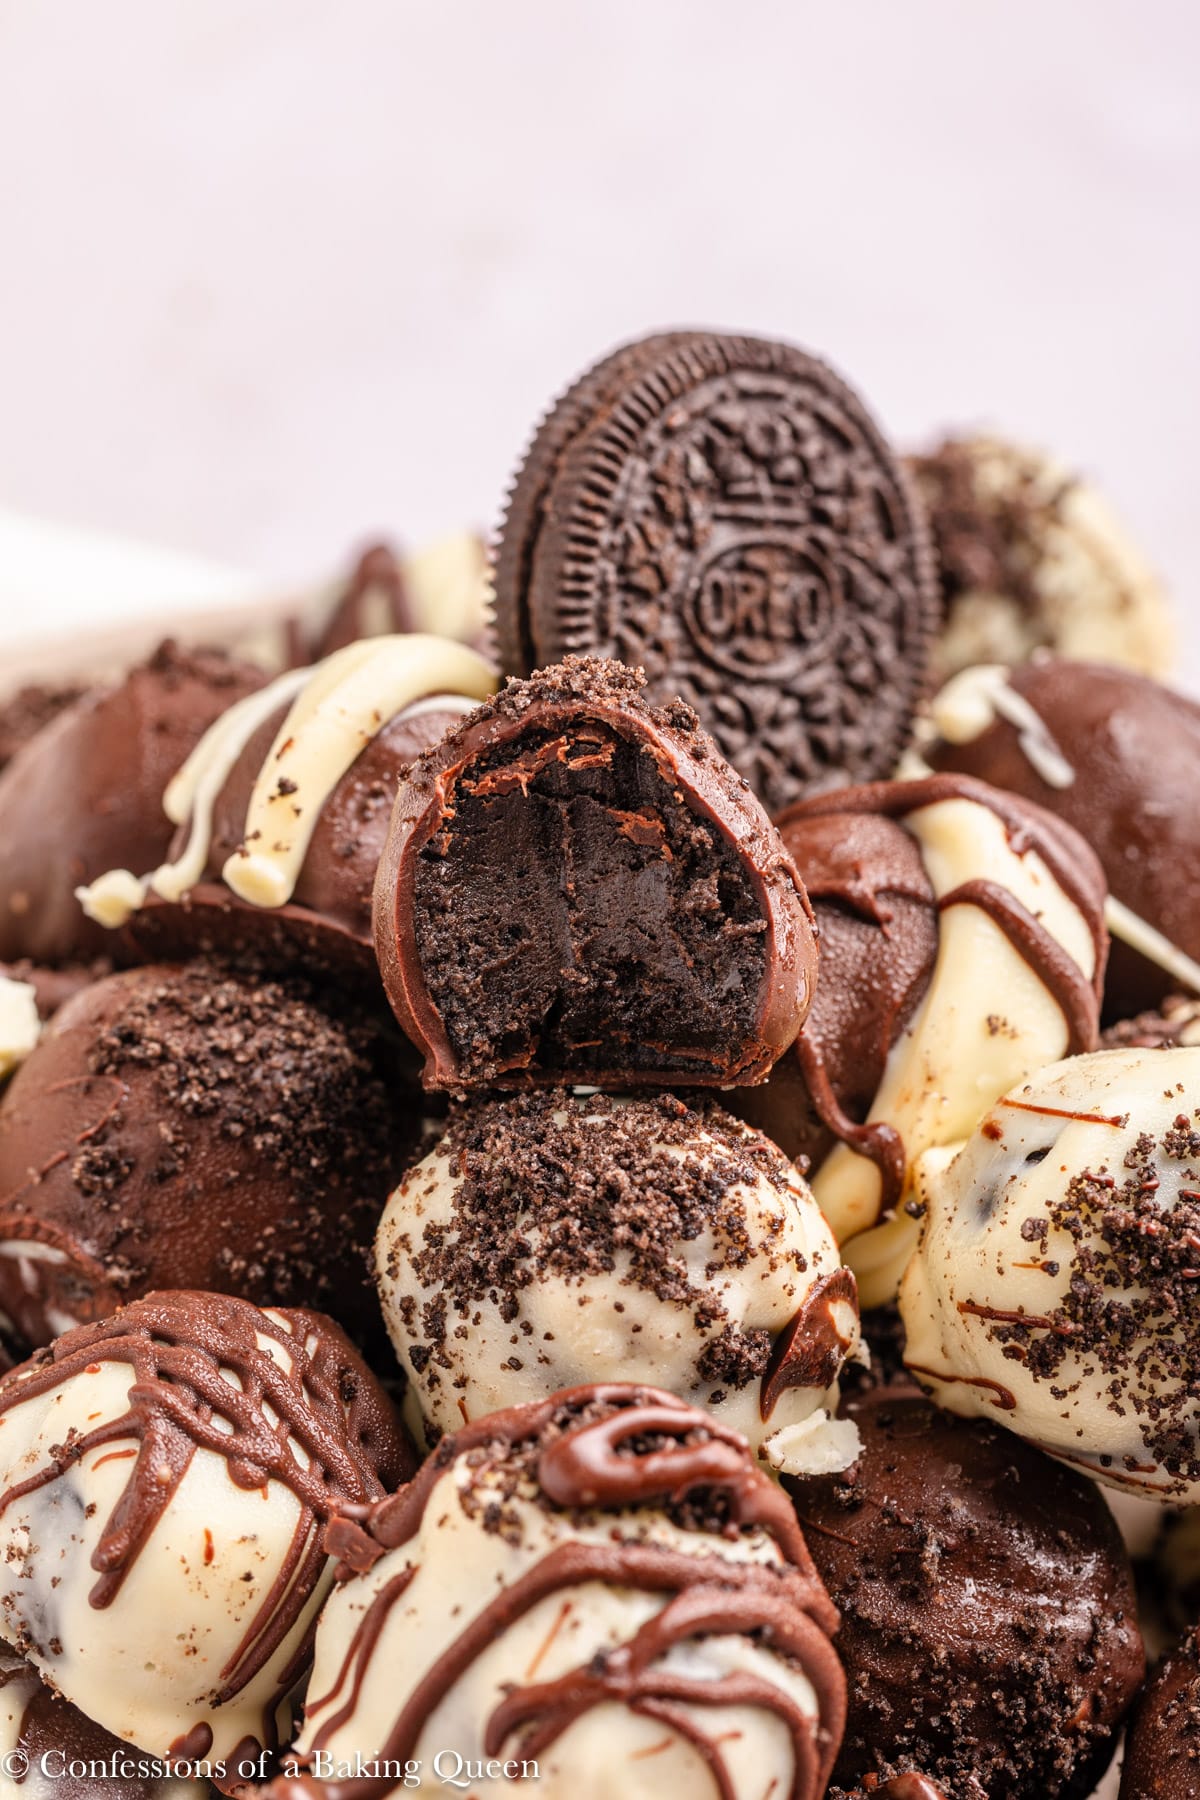 oreo truffle balls piled high with a half eaten on on top.